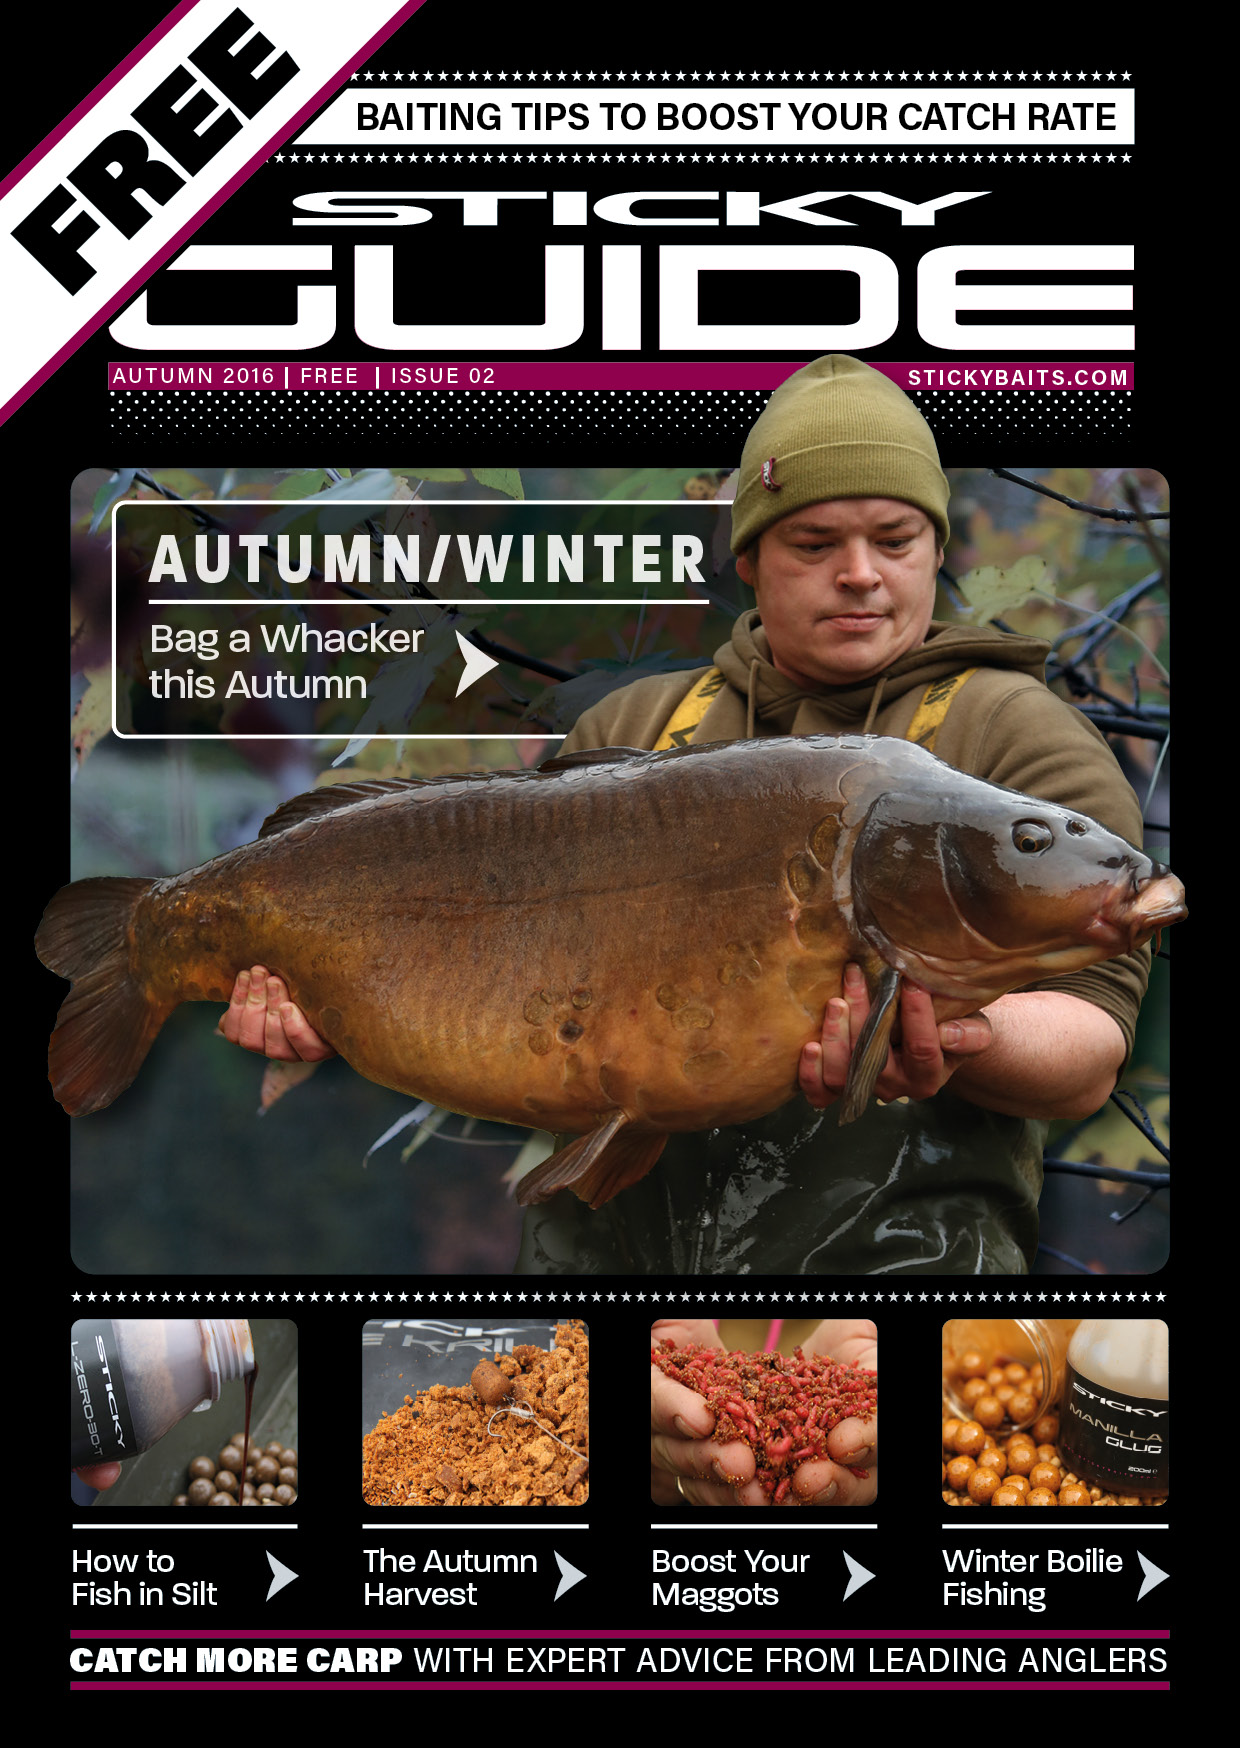 https://stickybaits.com/wp-content/uploads/2020/03/002_AutumnBooklet_2016-UPDATED.jpg